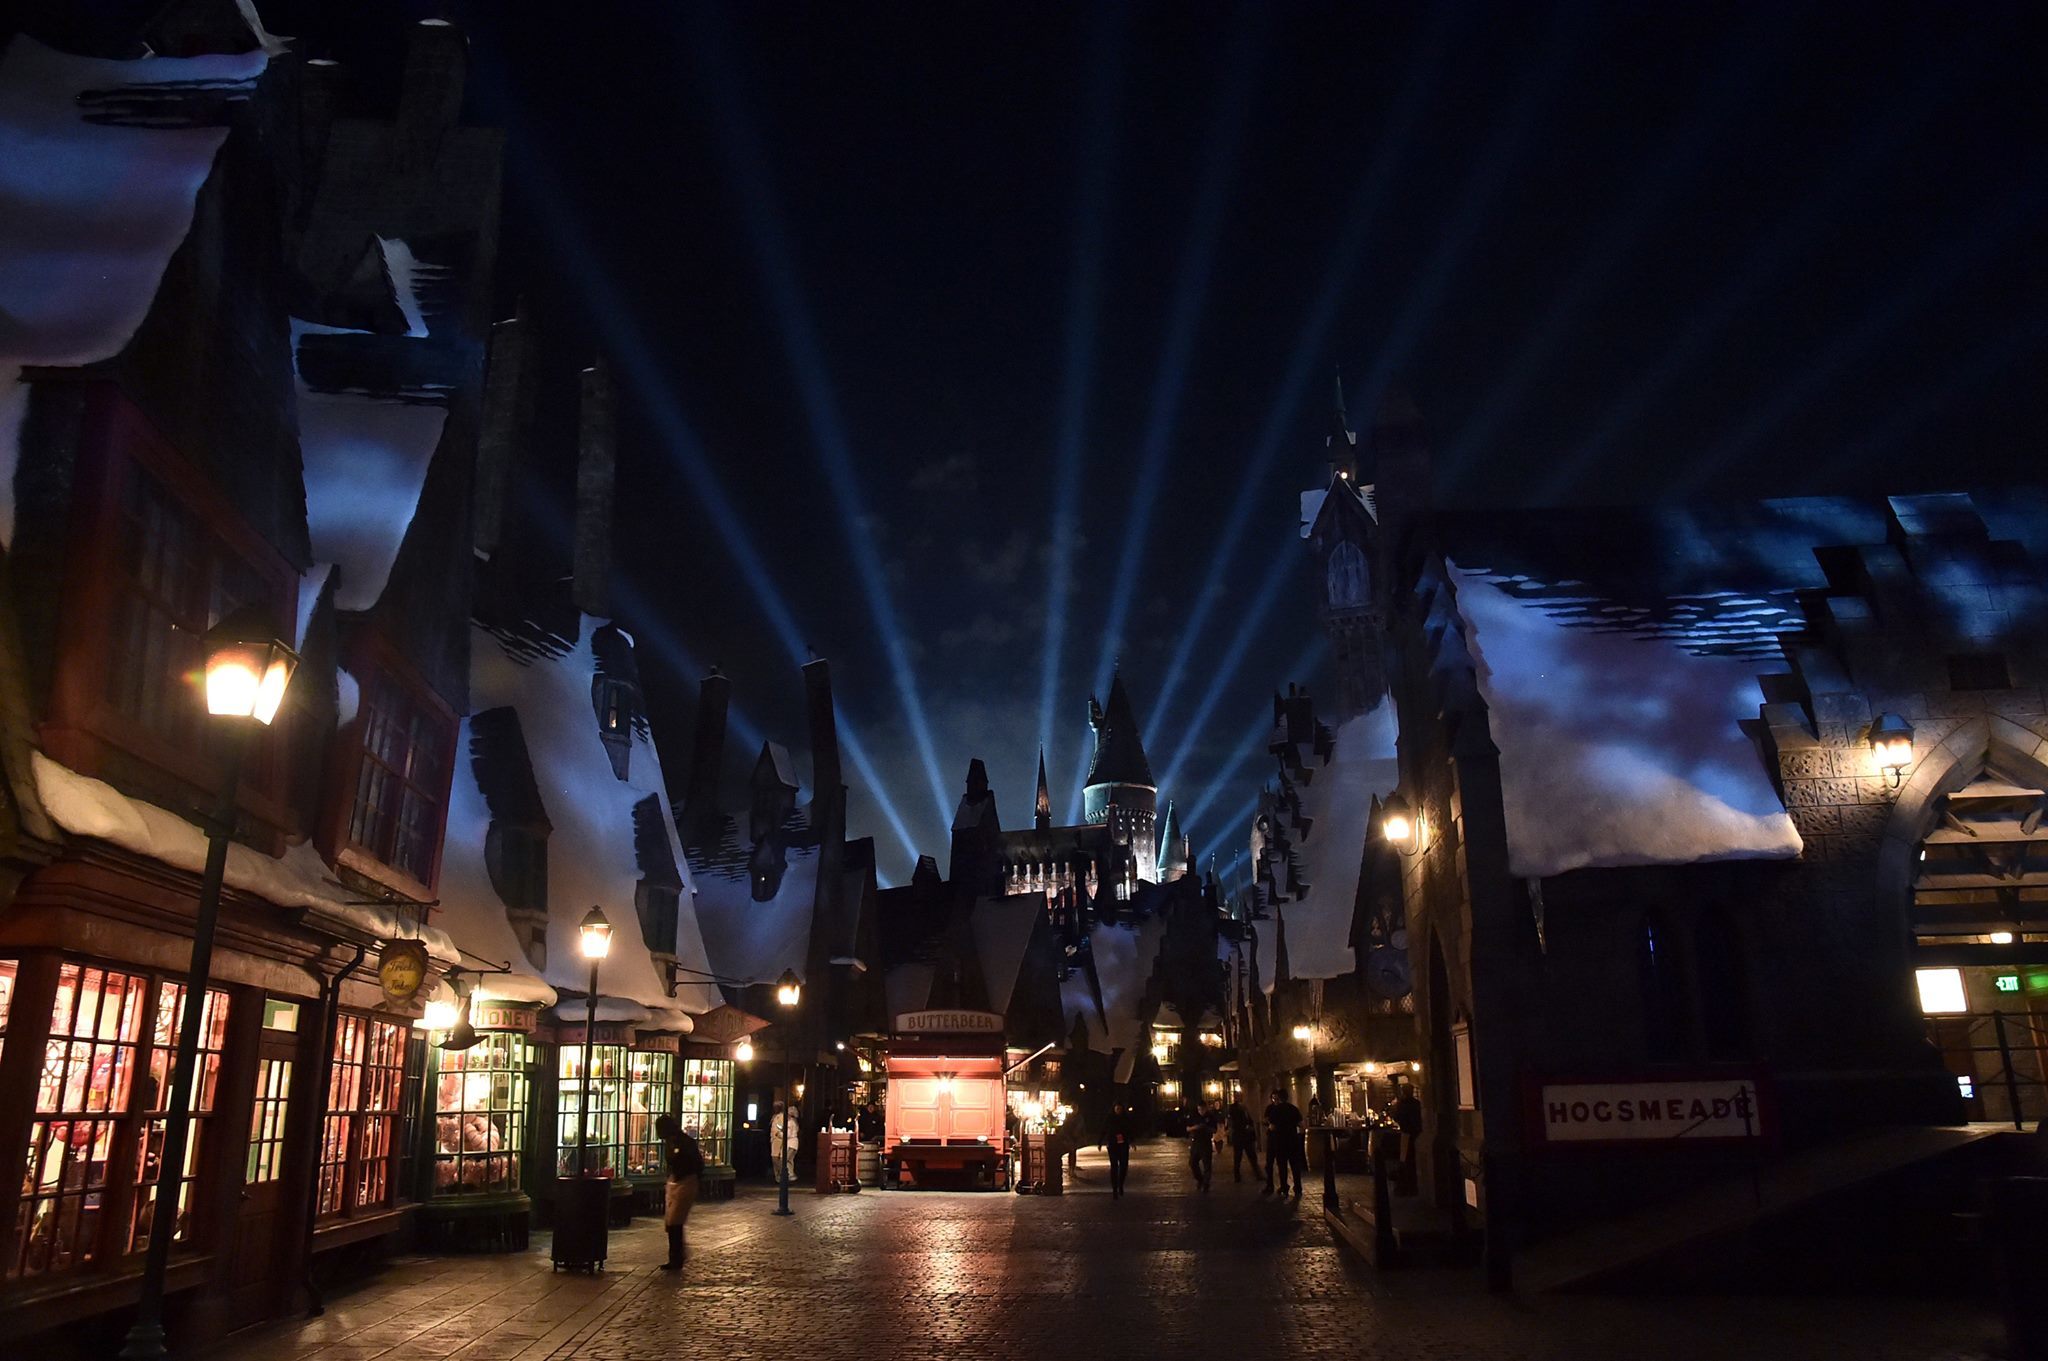 “The Nighttime Lights at Hogwarts Castle” Coming to Universal Studios Hollywood This Summer!